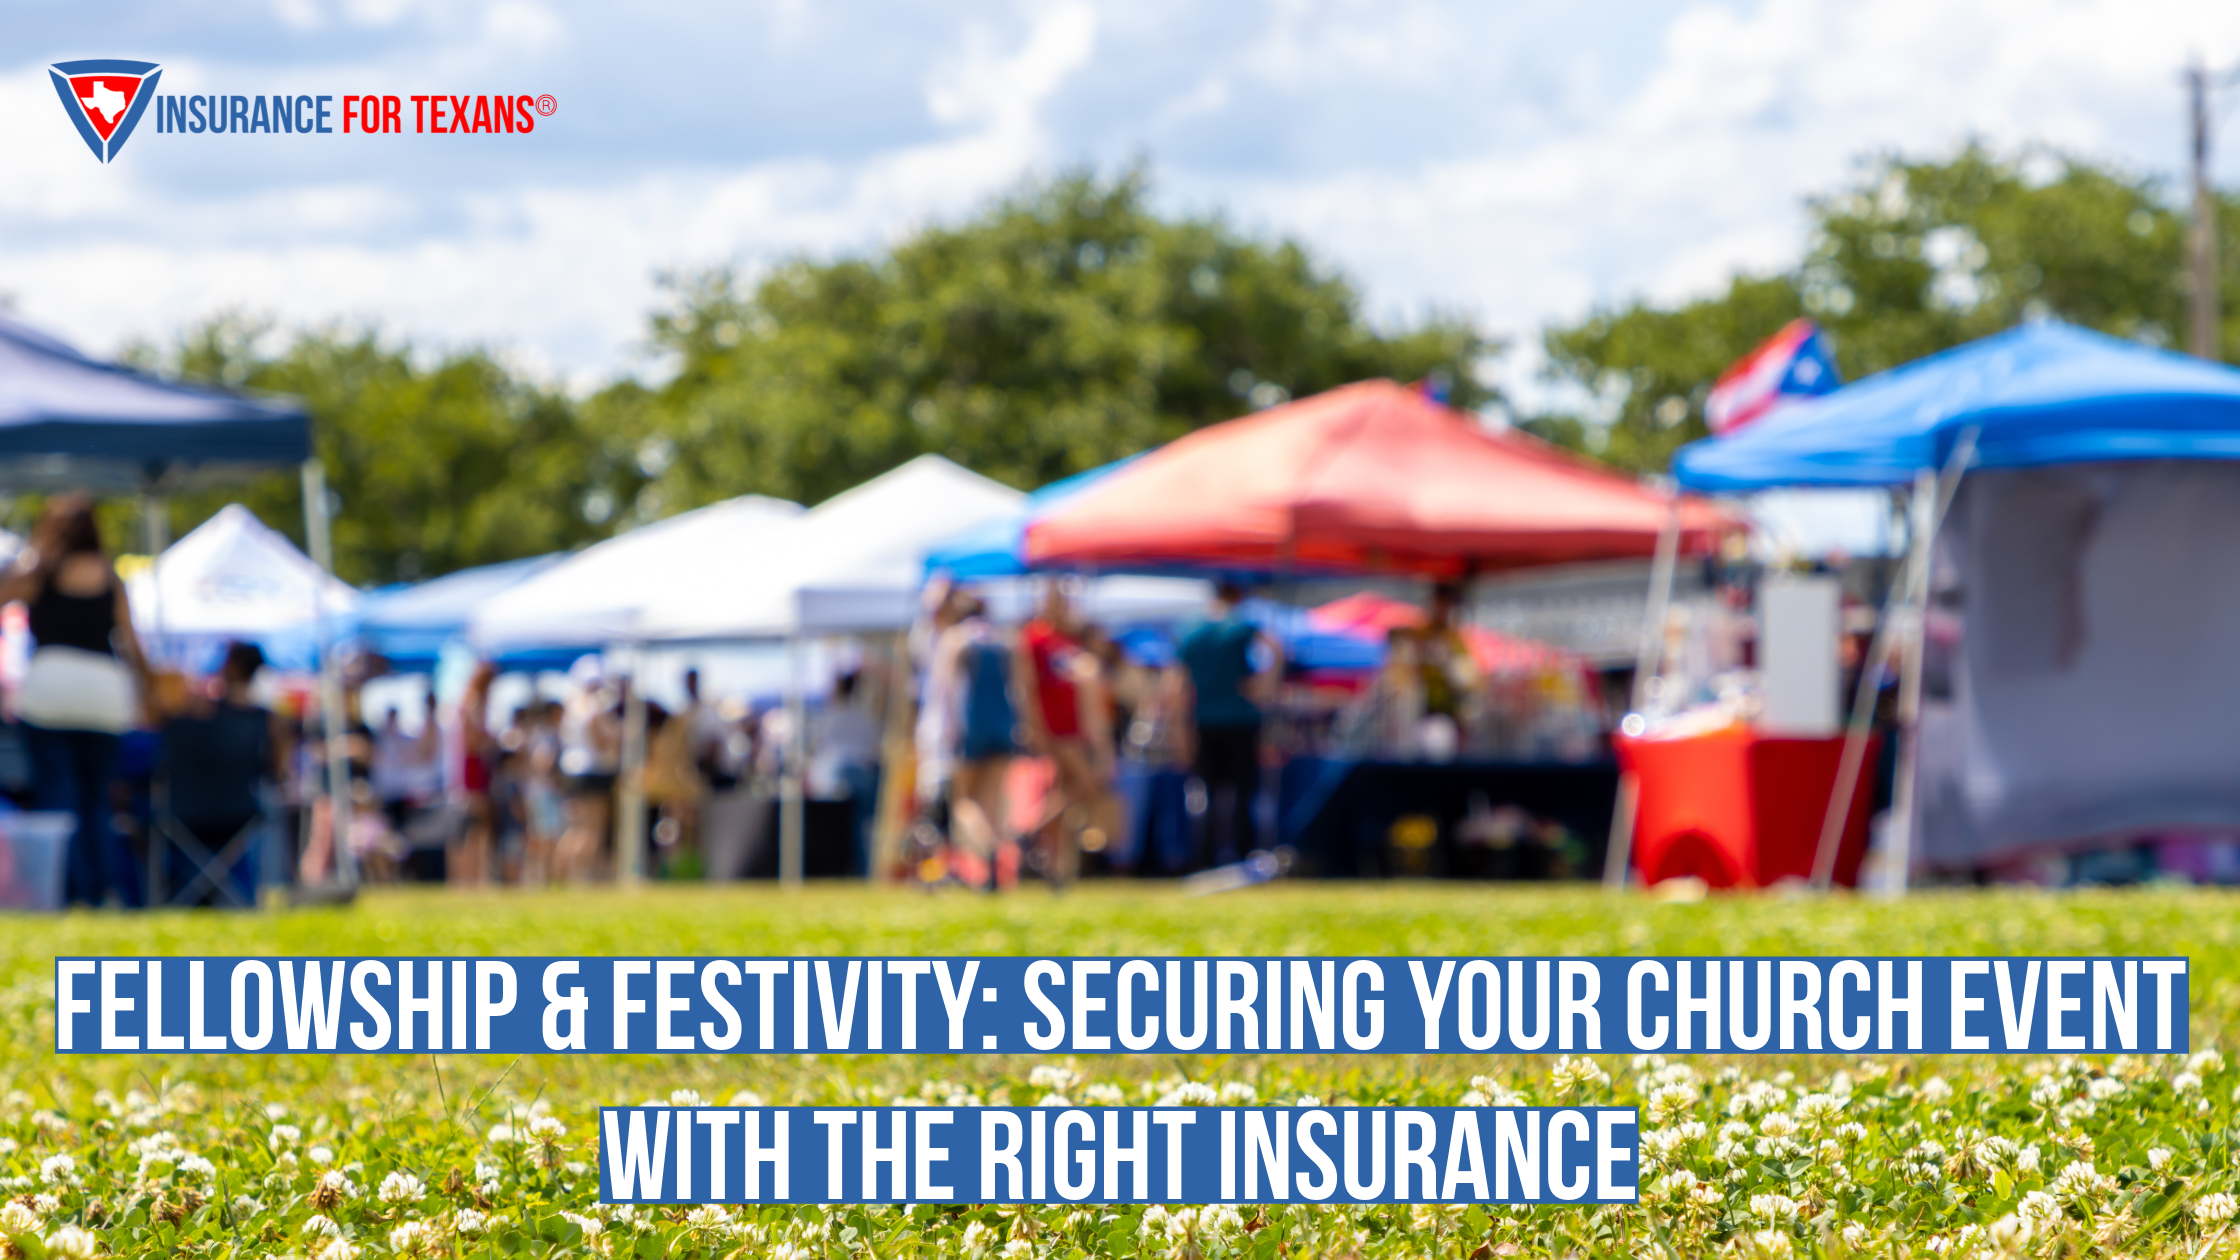 Fellowship & Festivity: Securing Your Church Event with the Right Insurance